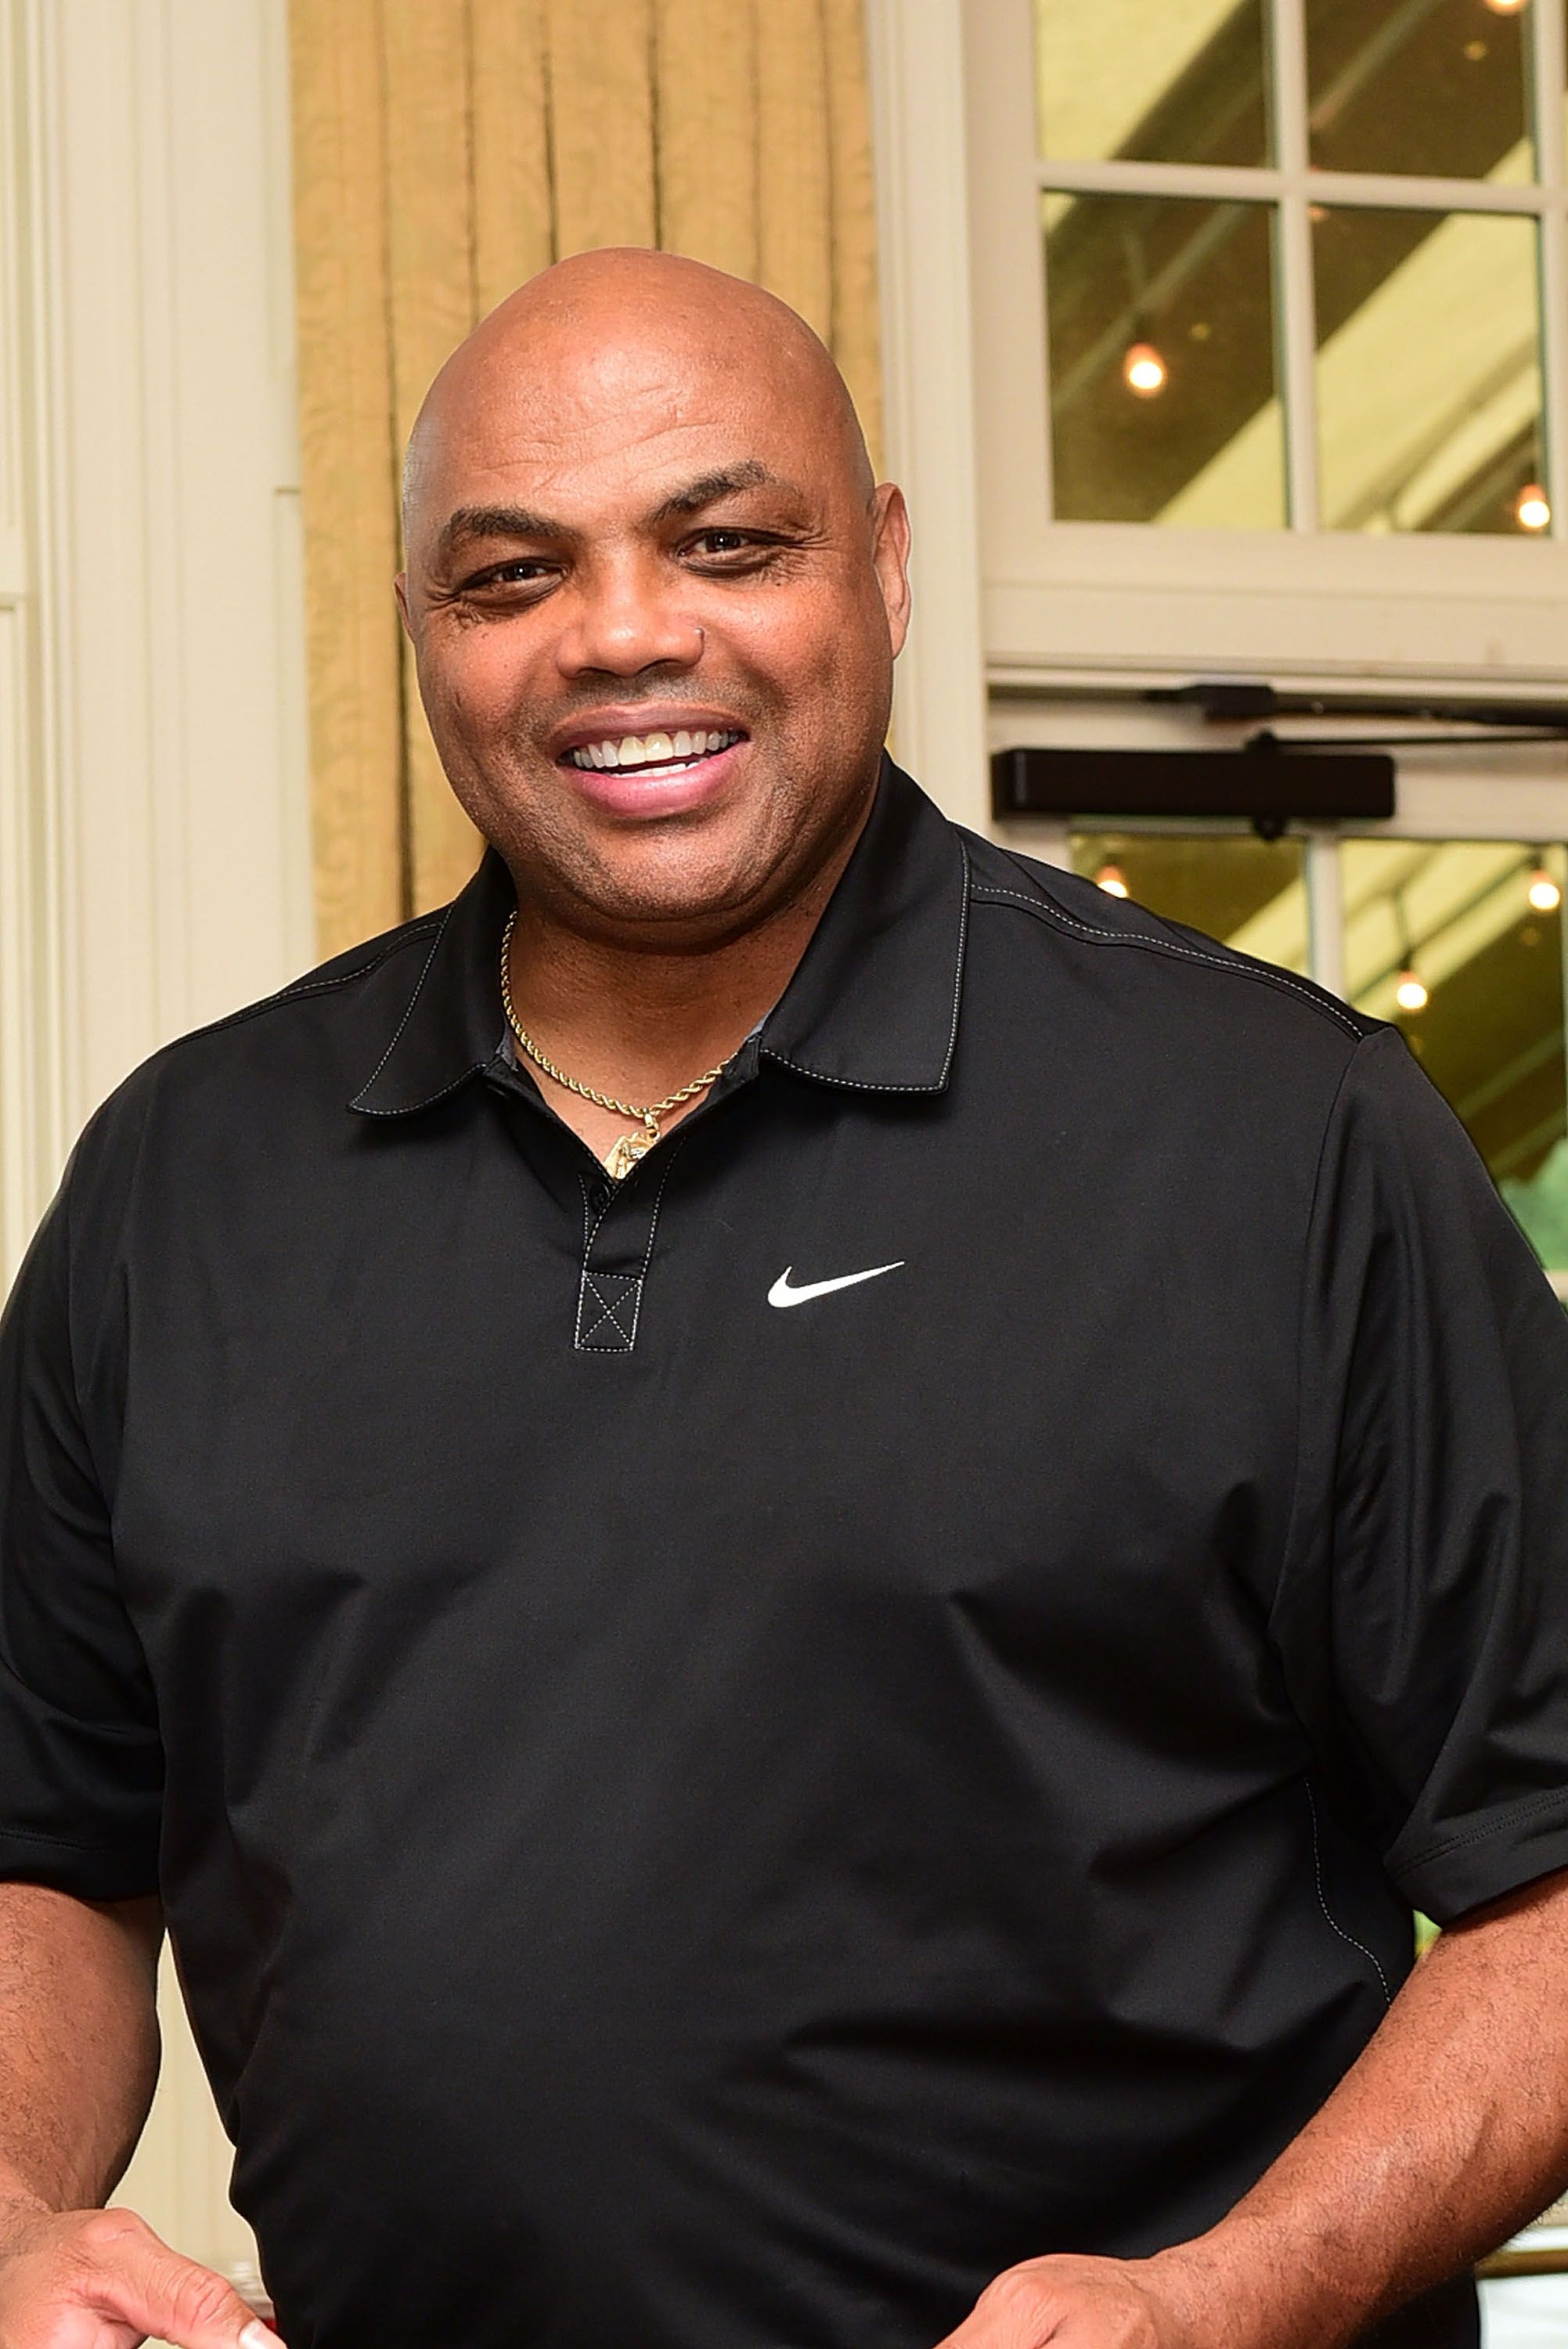 Charles Barkley at Edgewood Tahoe Golf Course in Nevada in July 11, 2019 | Photo: Getty Images